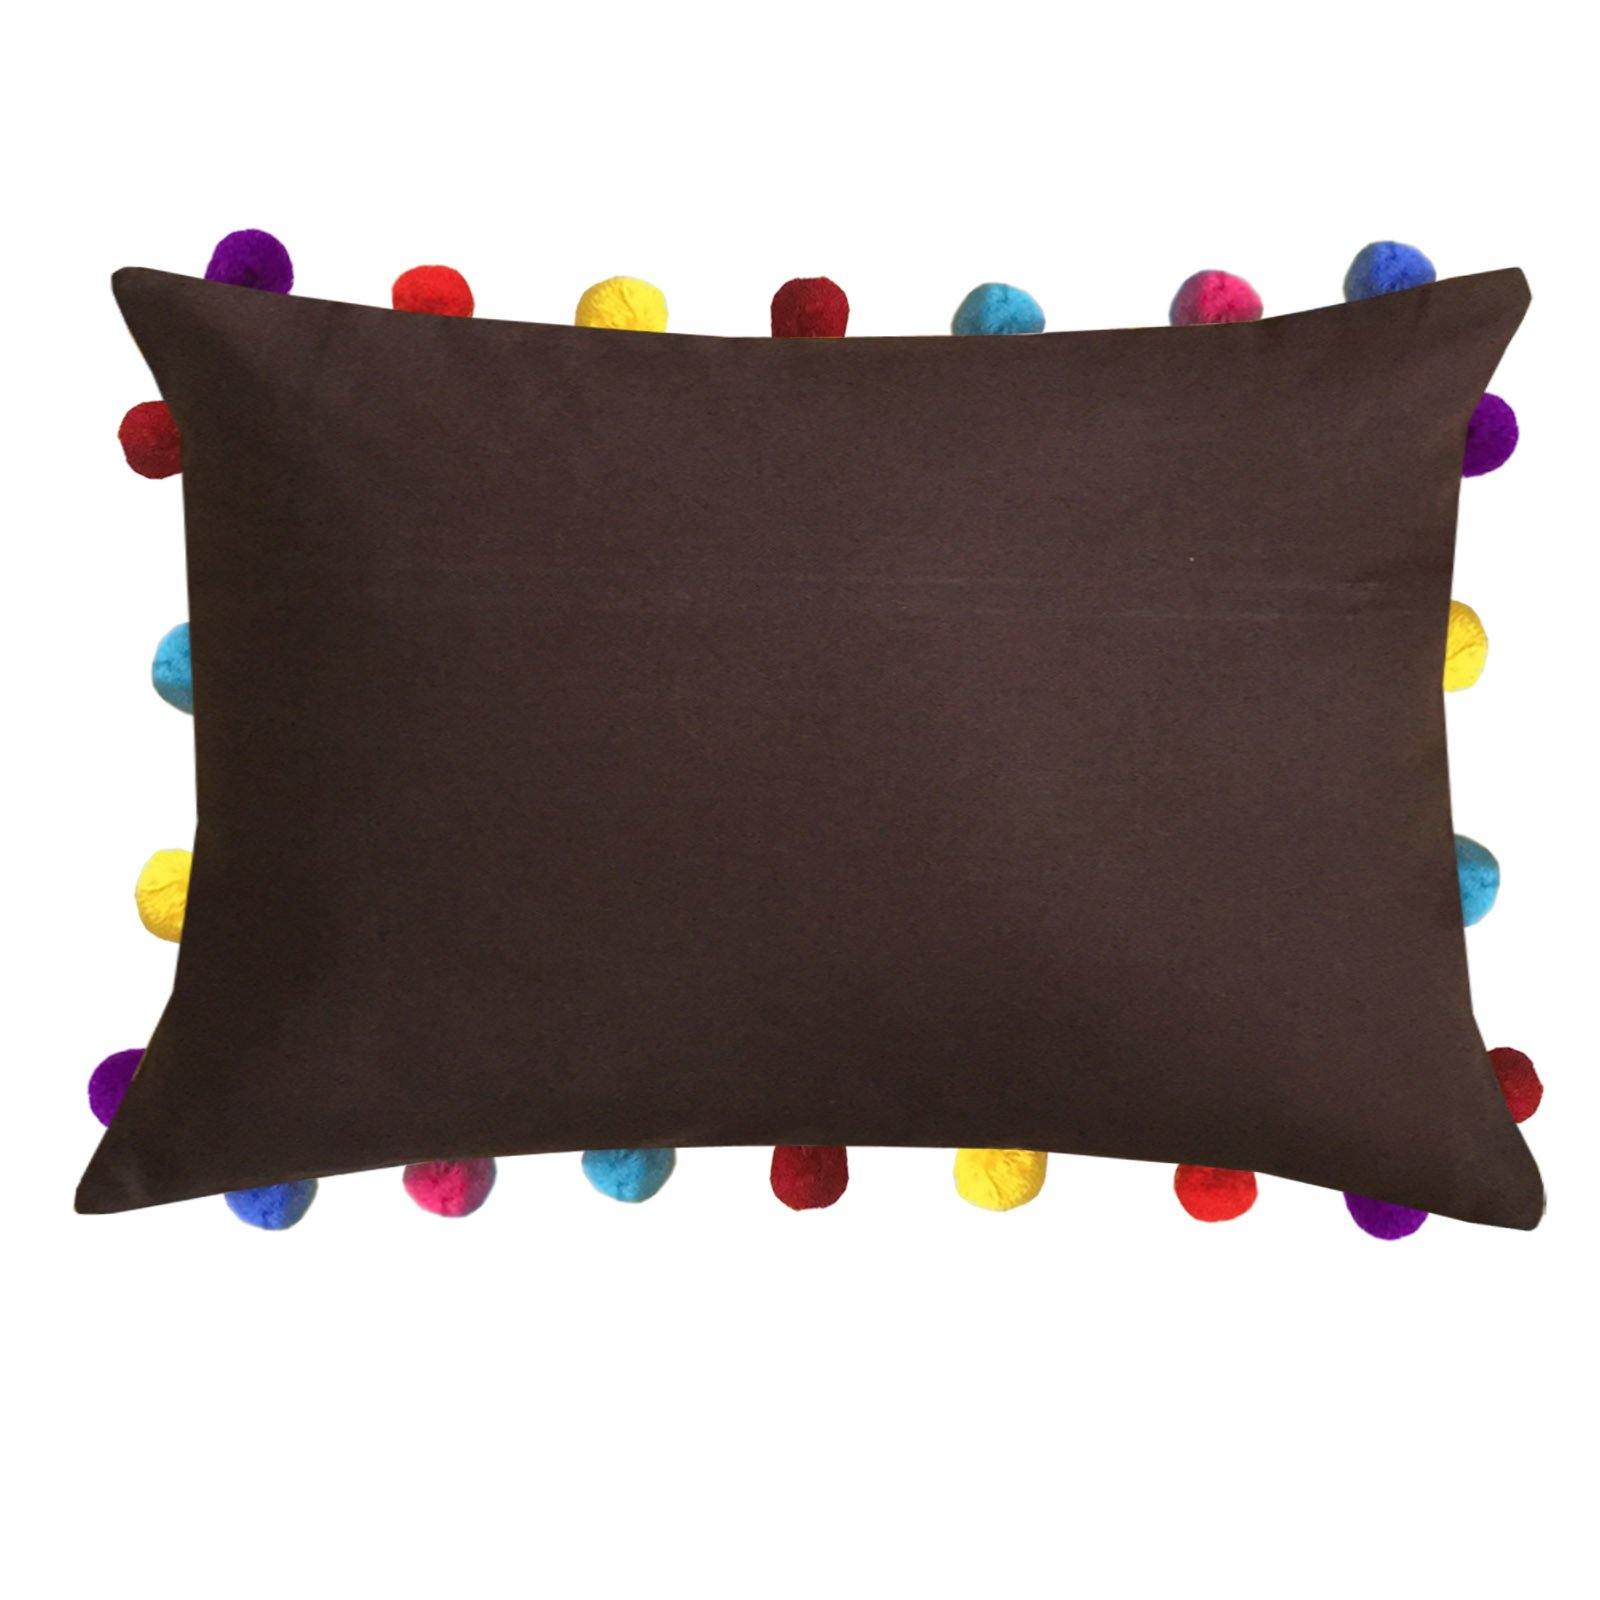 Lushomes French Roast Cushion Cover with Colorful Pom poms (Single pc, 14 x 20”) - Lushomes